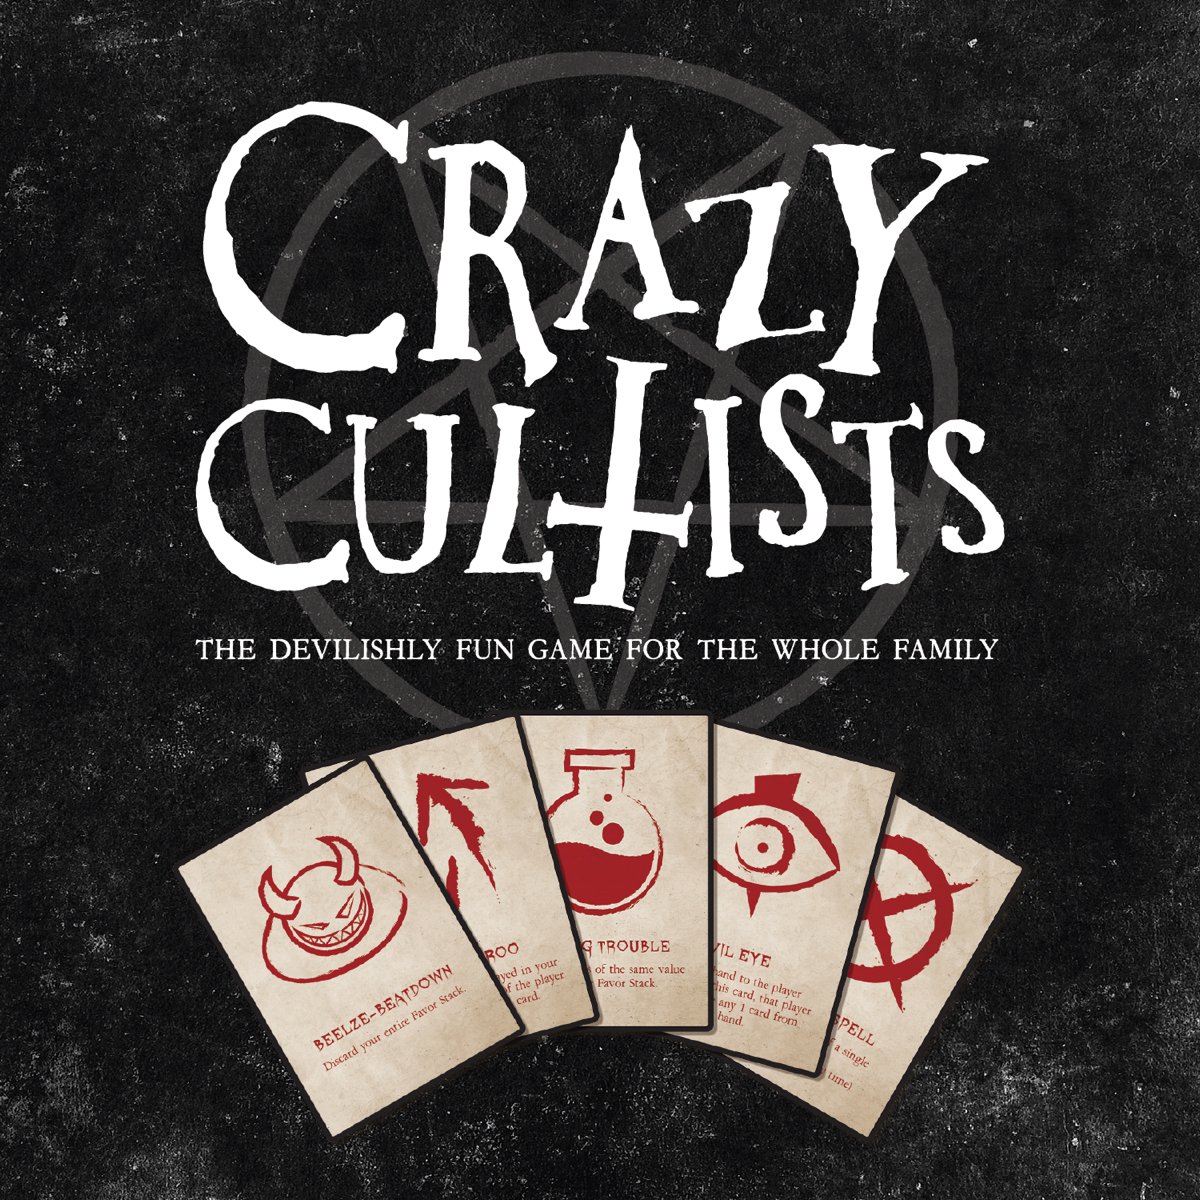 Crazy Cultists